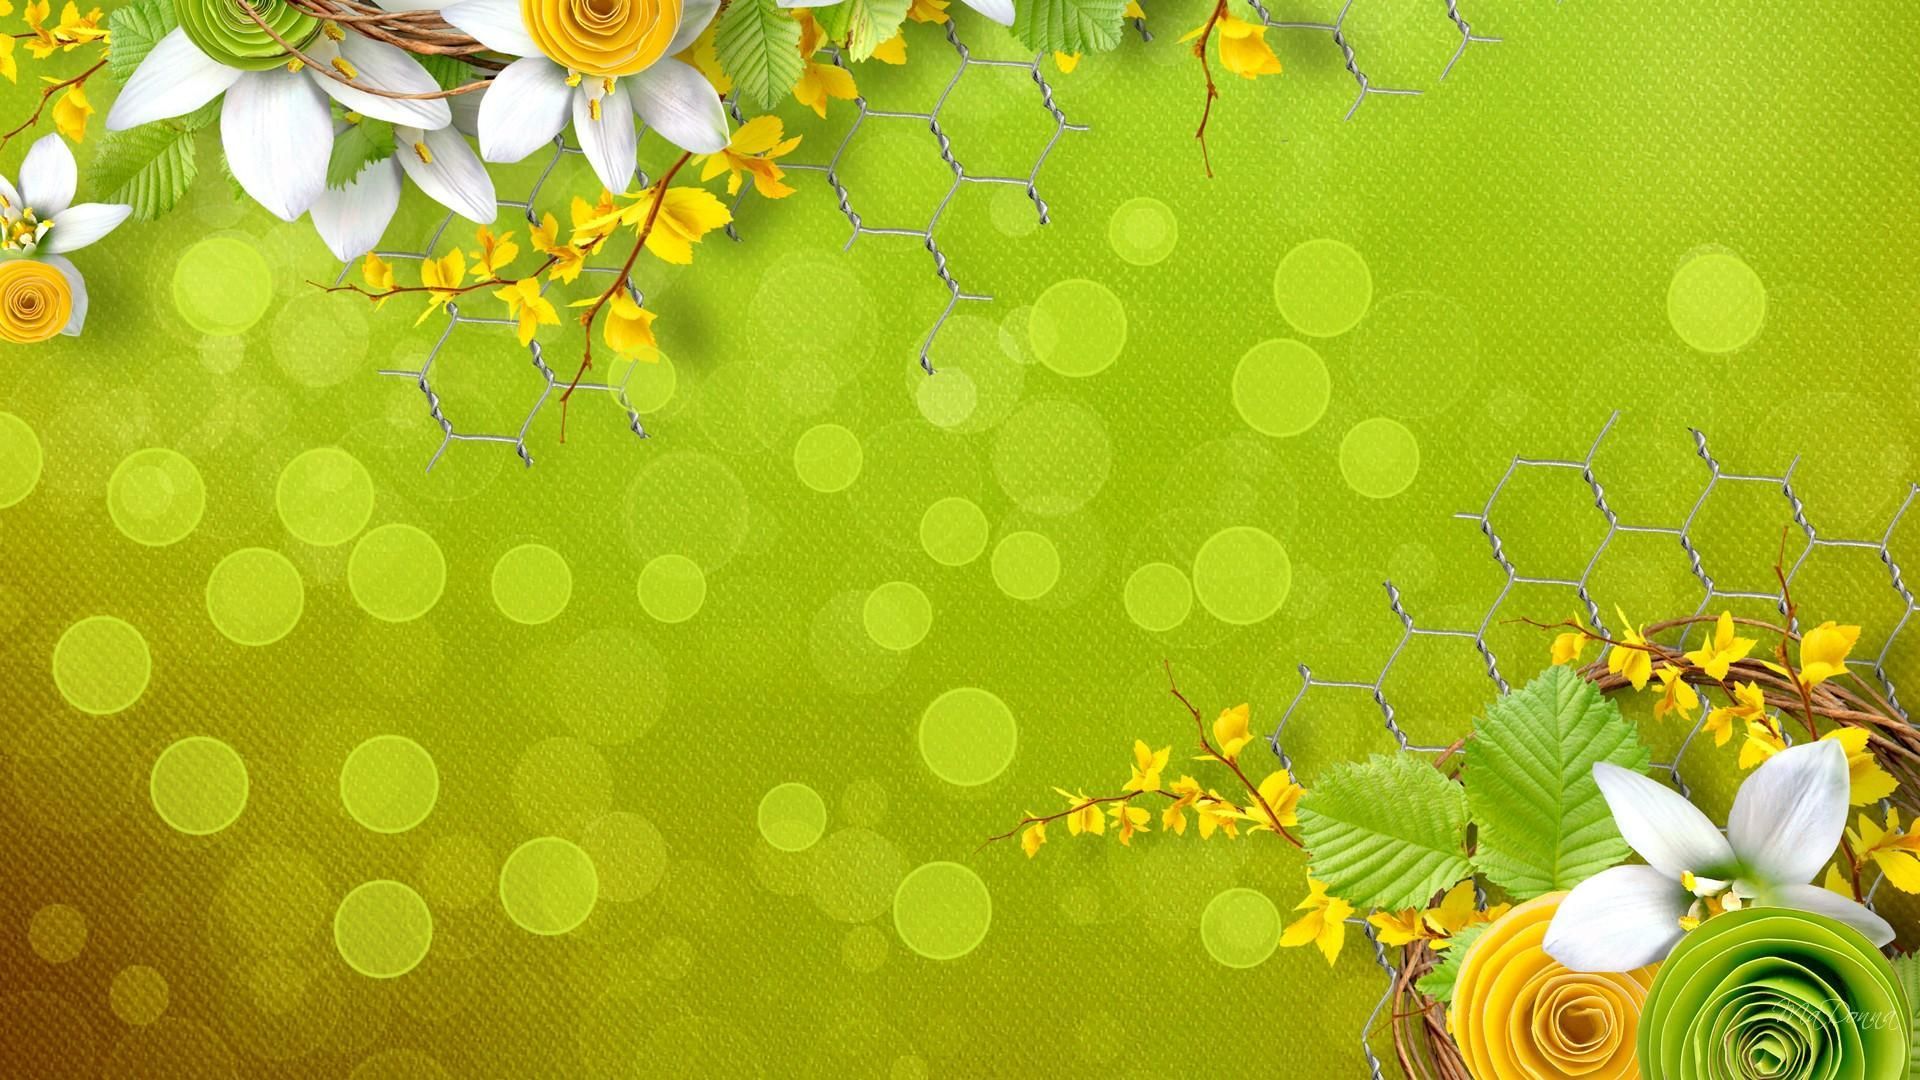 1920x1080 Splendid Green Yellow Flowers Download Hd Picture Pin Hd Wallpaper Drawing Diapositivas Poster